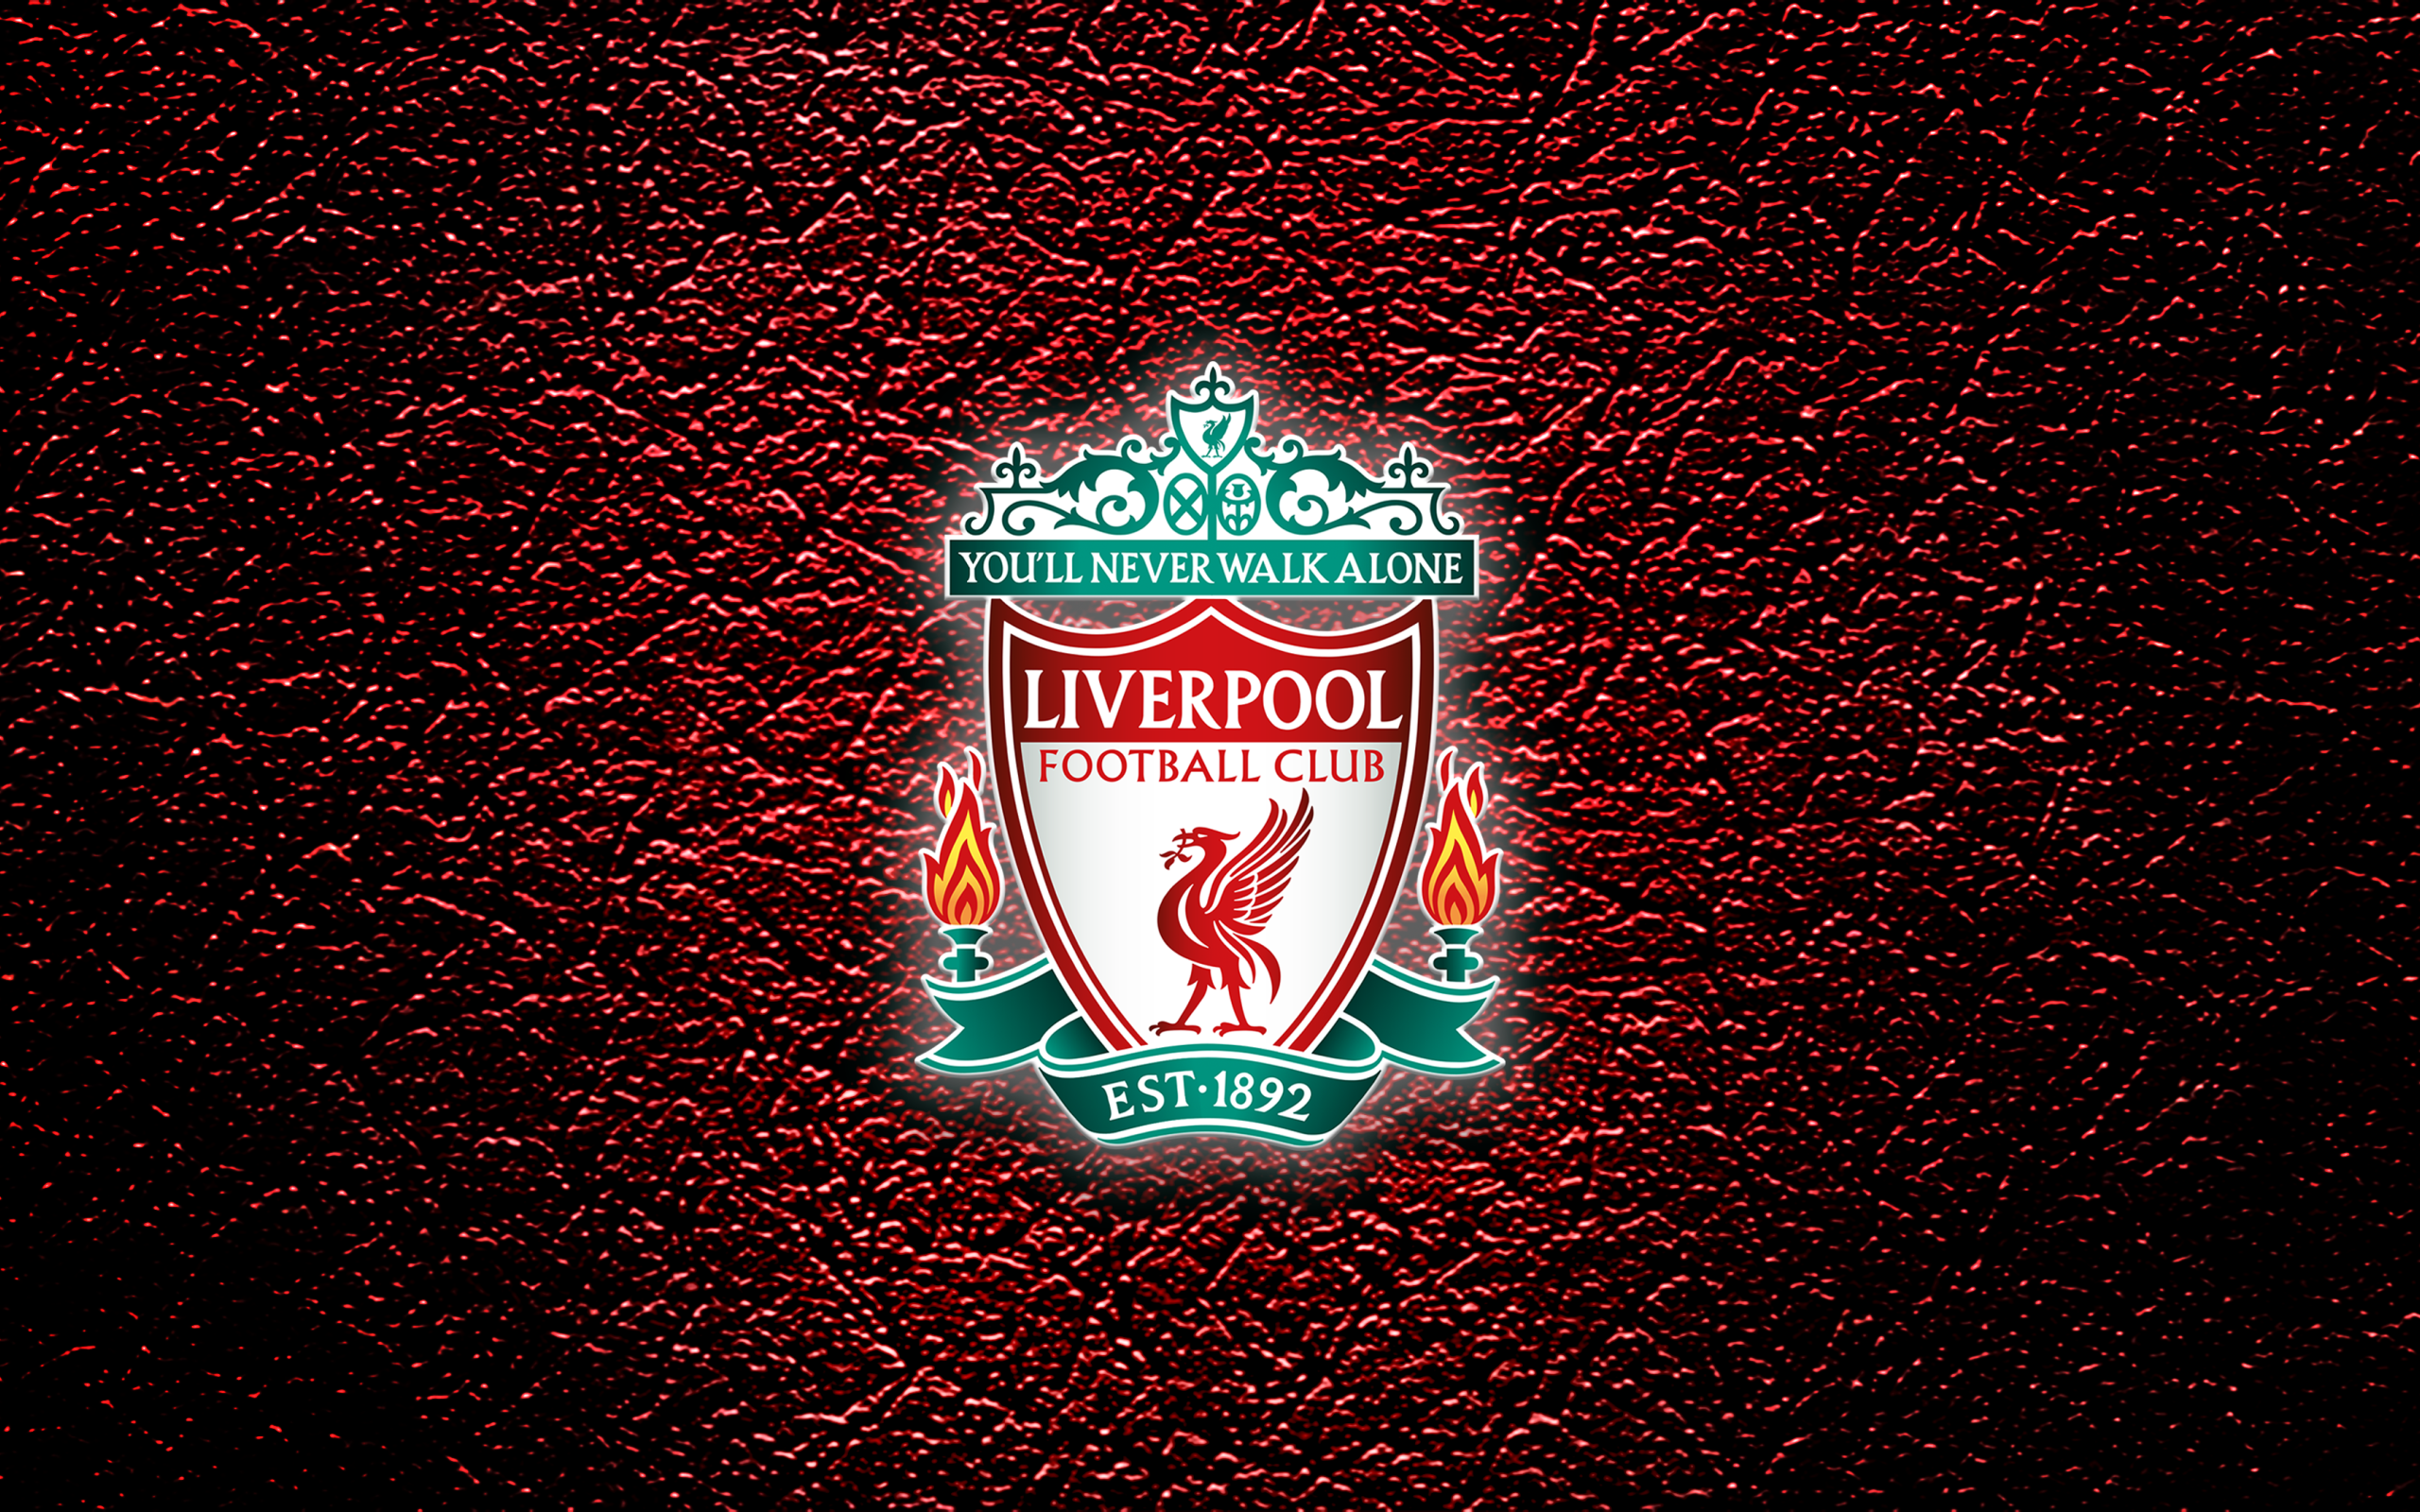 Logo of football club Liverpool on a red leather background